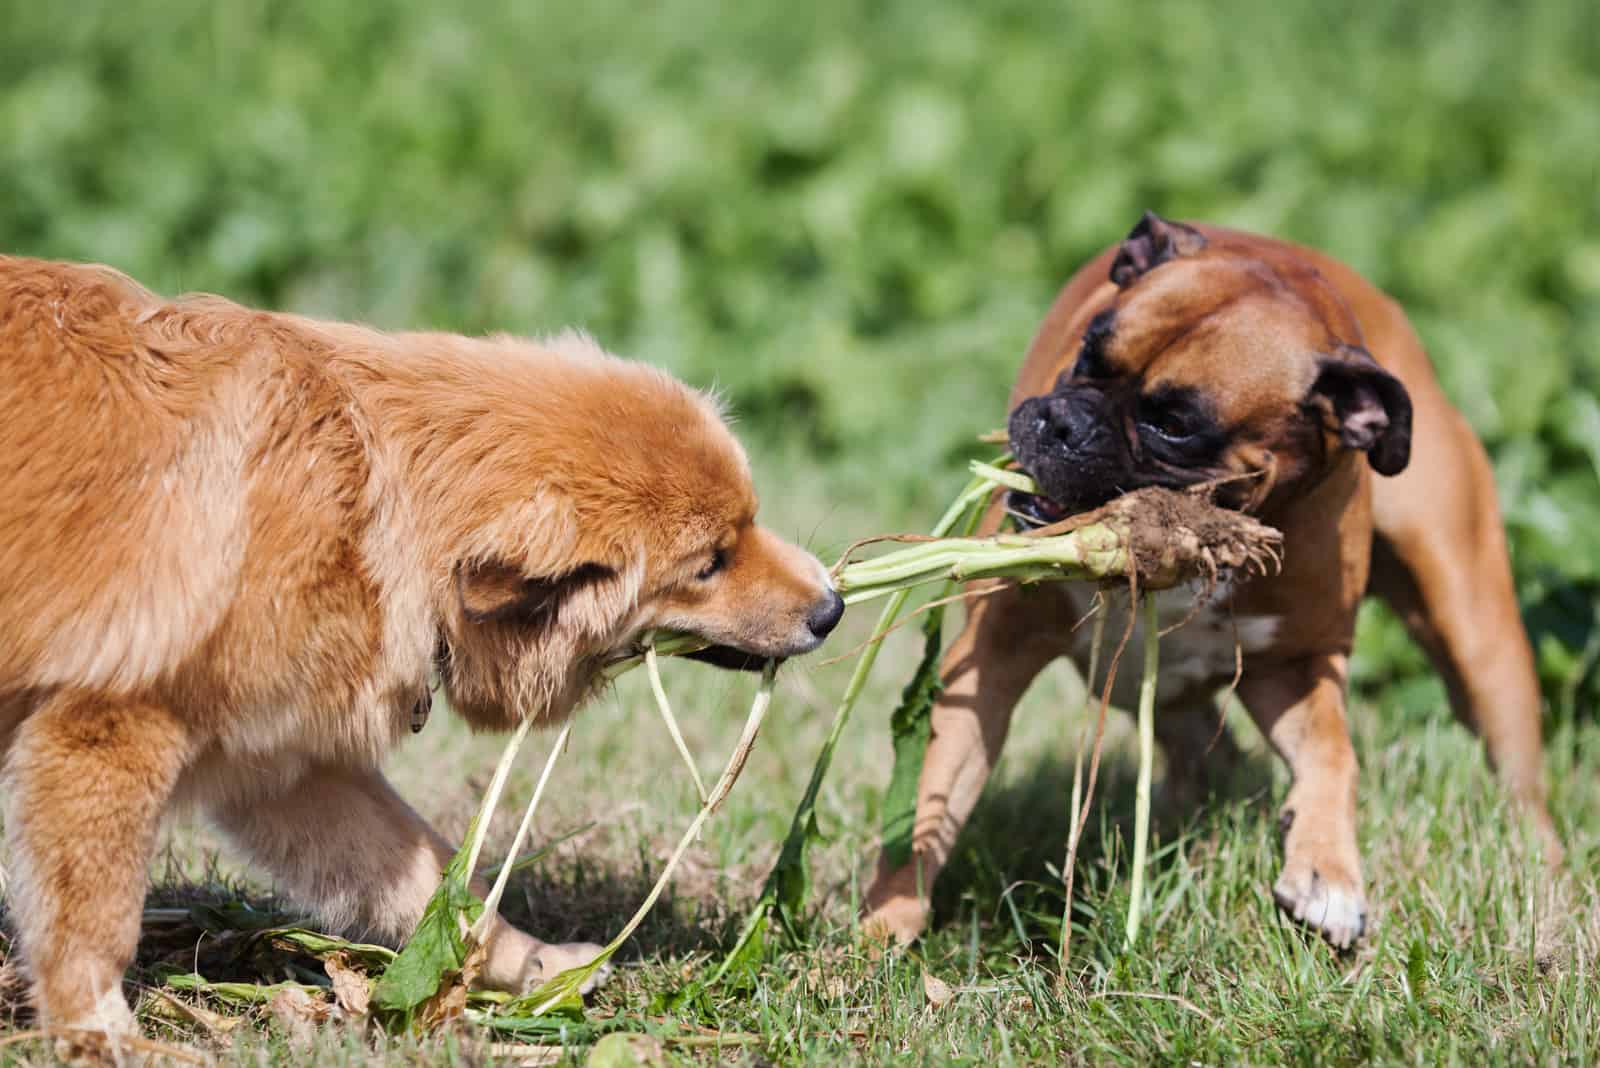 Can Dogs Eat Turnips? Finding Safe Veggies For Your Dog